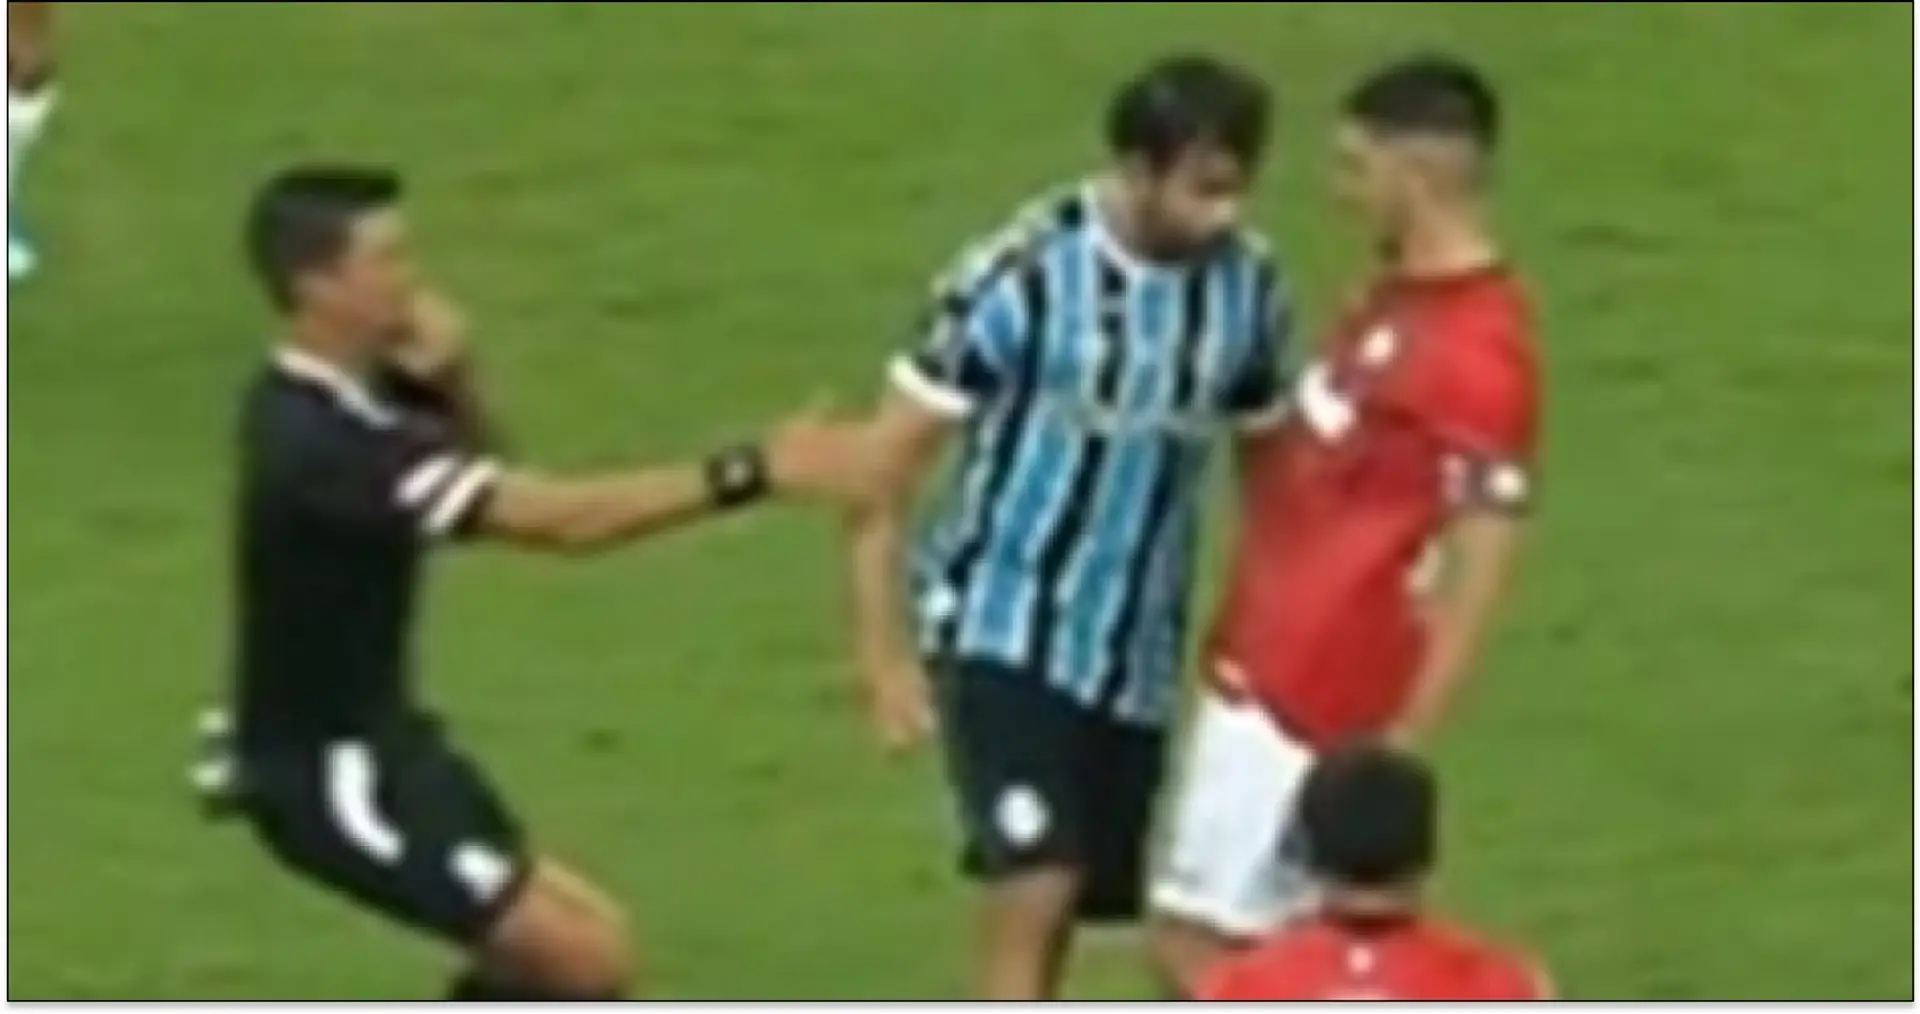 Just like good old days: Diego Costa headbutts opponent in Copa Libertadores